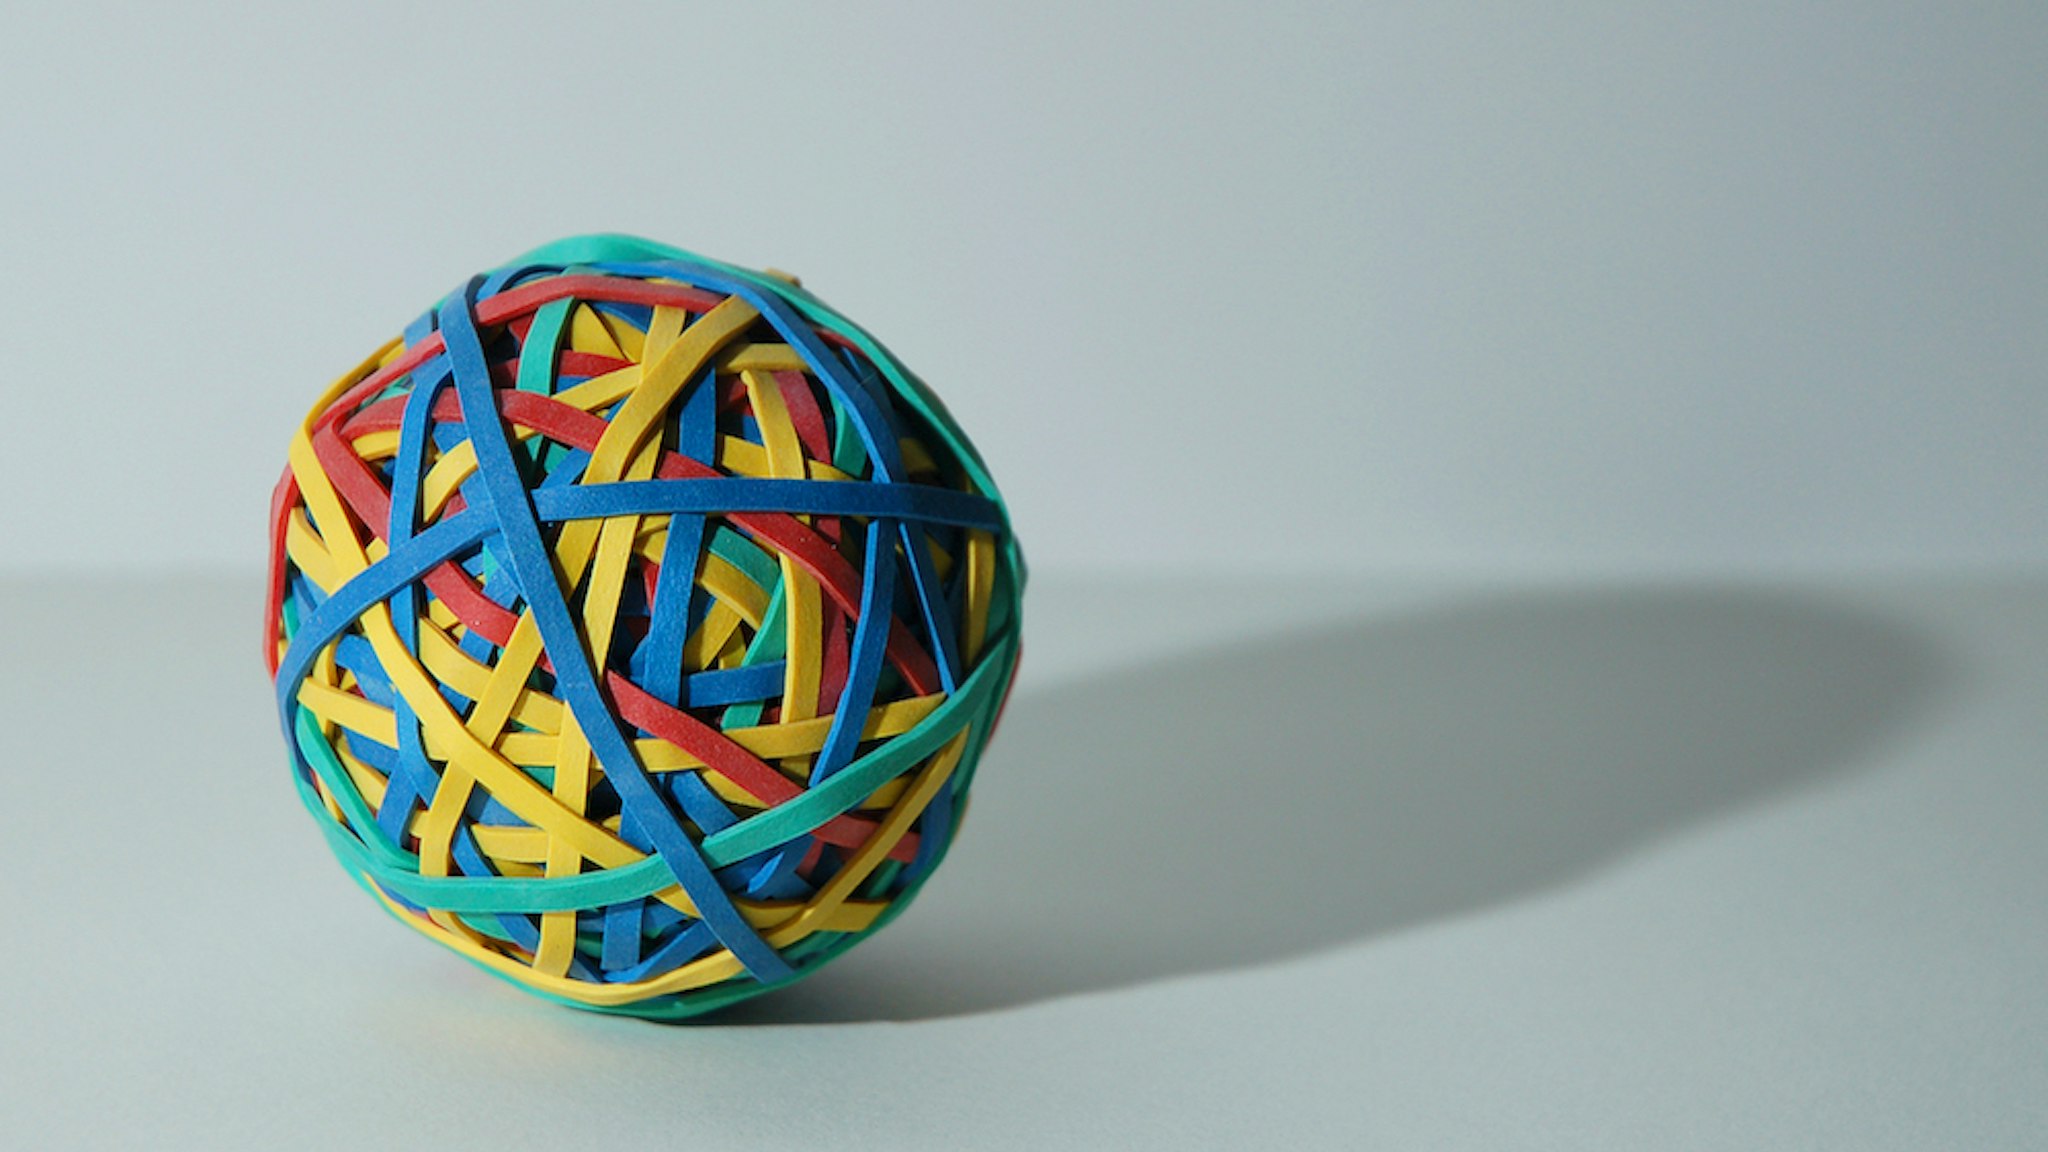 Multicolor rubber band ball on solid gray background.